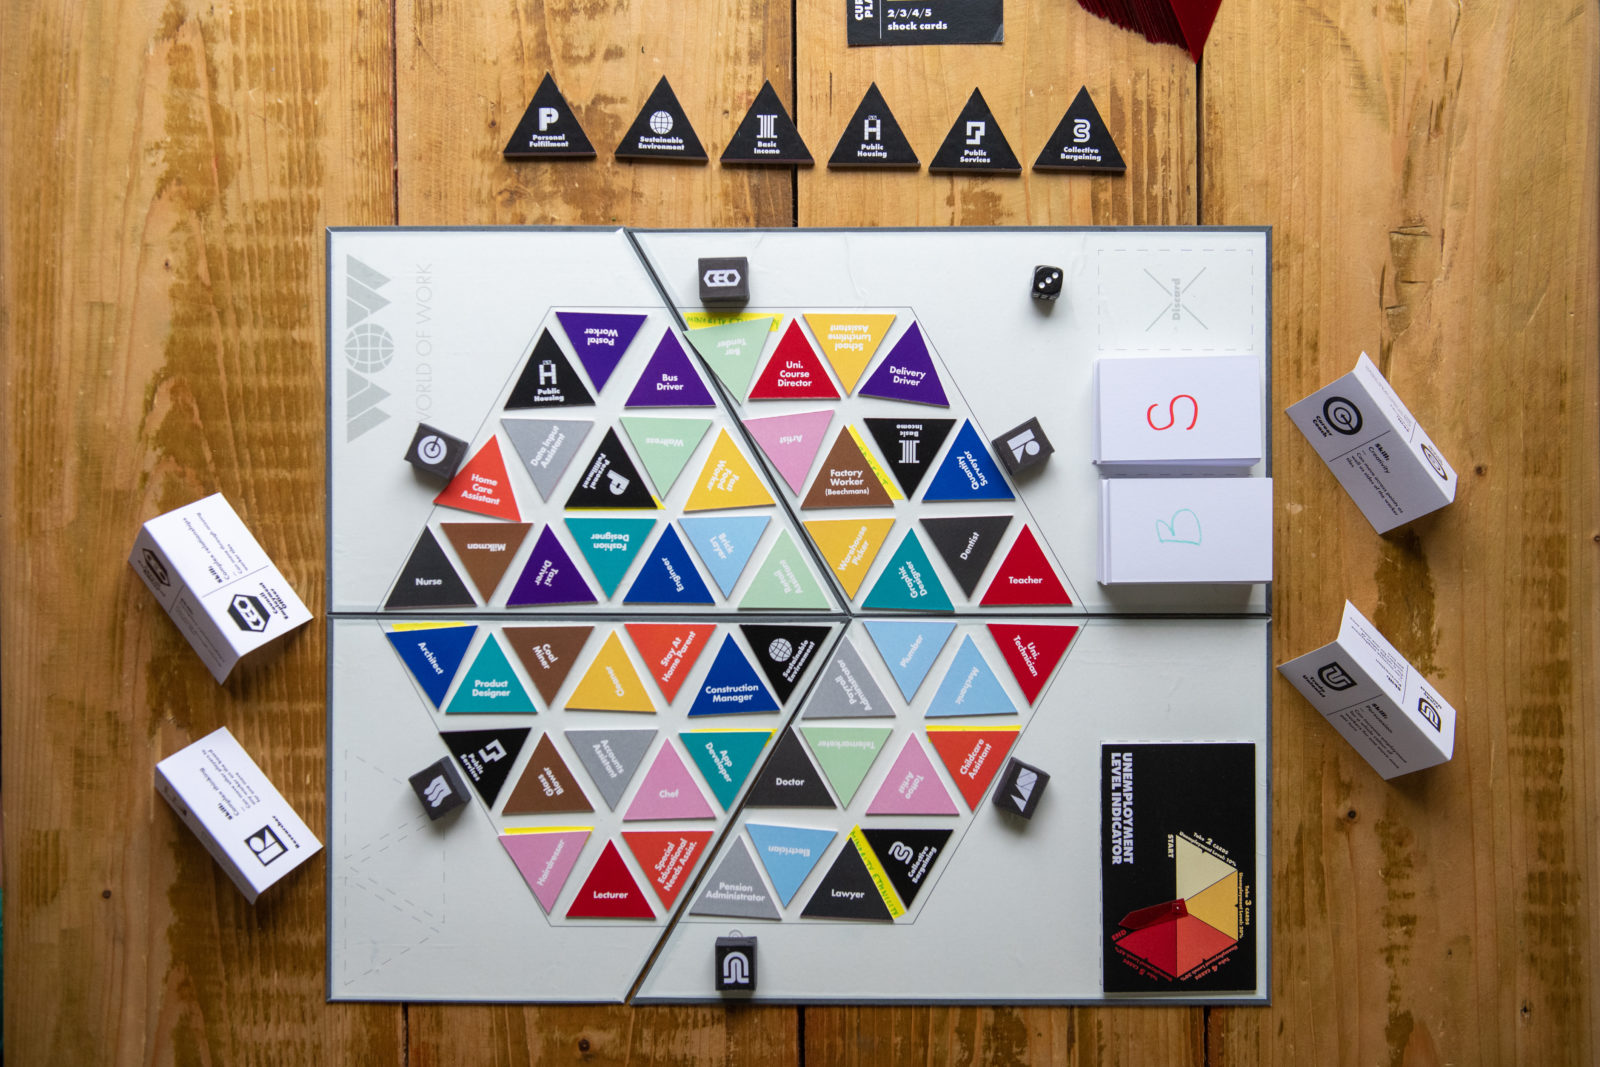 A board game is set up on a wooden table. Colourful triangular counters are set up on the board, black counters on the table around it and black and white cards.